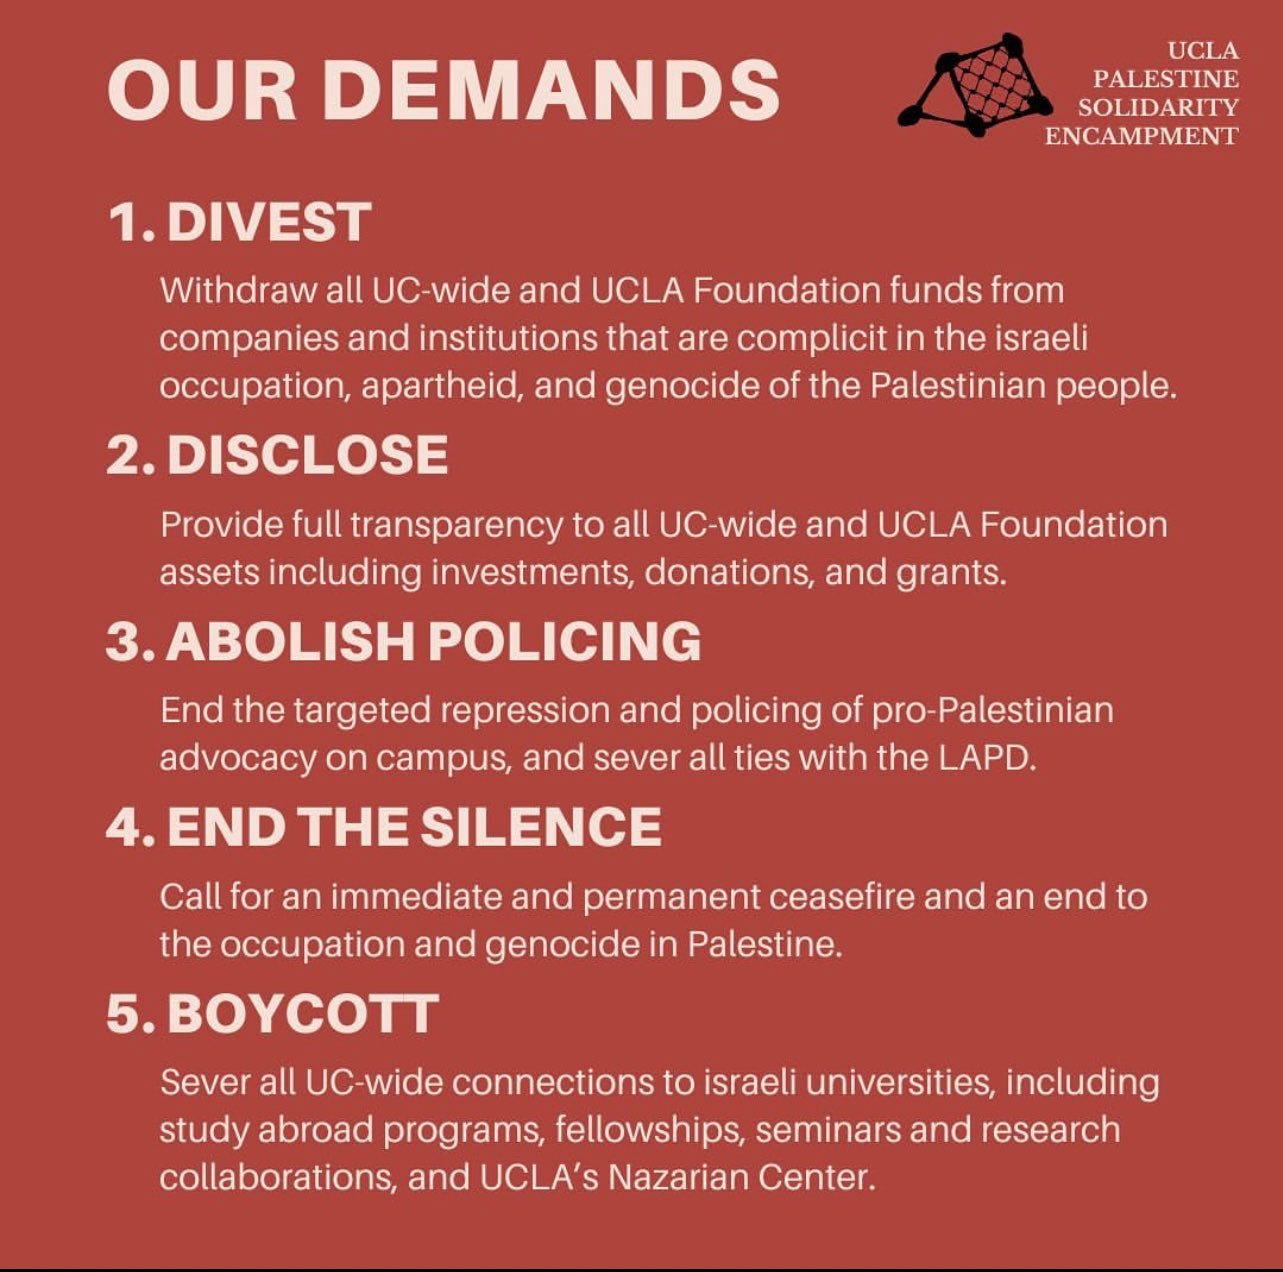 OUR DEMANDS
UCLA
PALESTINE SOLIDARITY
ENCAMPMENT
1. DIVEST
Withdraw all UC-wide and UCLA Foundation funds from companies and institutions that are complicit in the israeli occupation, apartheid, and genocide of the Palestinian people.
2. DISCLOSE
Provide full transparency to all UC-wide and UCLA Foundation assets including investments, donations, and grants.
3. ABOLISH POLICING
End the targeted repression and policing of pro-Palestinian advocacy on campus, and sever all ties with the LAPD.
4. END THE SILENCE
Call for an immediate and permanent ceasefire and an end to the occupation and genocide in Palestine.
5. BOYCOTT
Sever all UC-wide connections to israeli universities, including study abroad programs, fellowships, seminars and research collaborations, and UCLA's Nazarian Center.